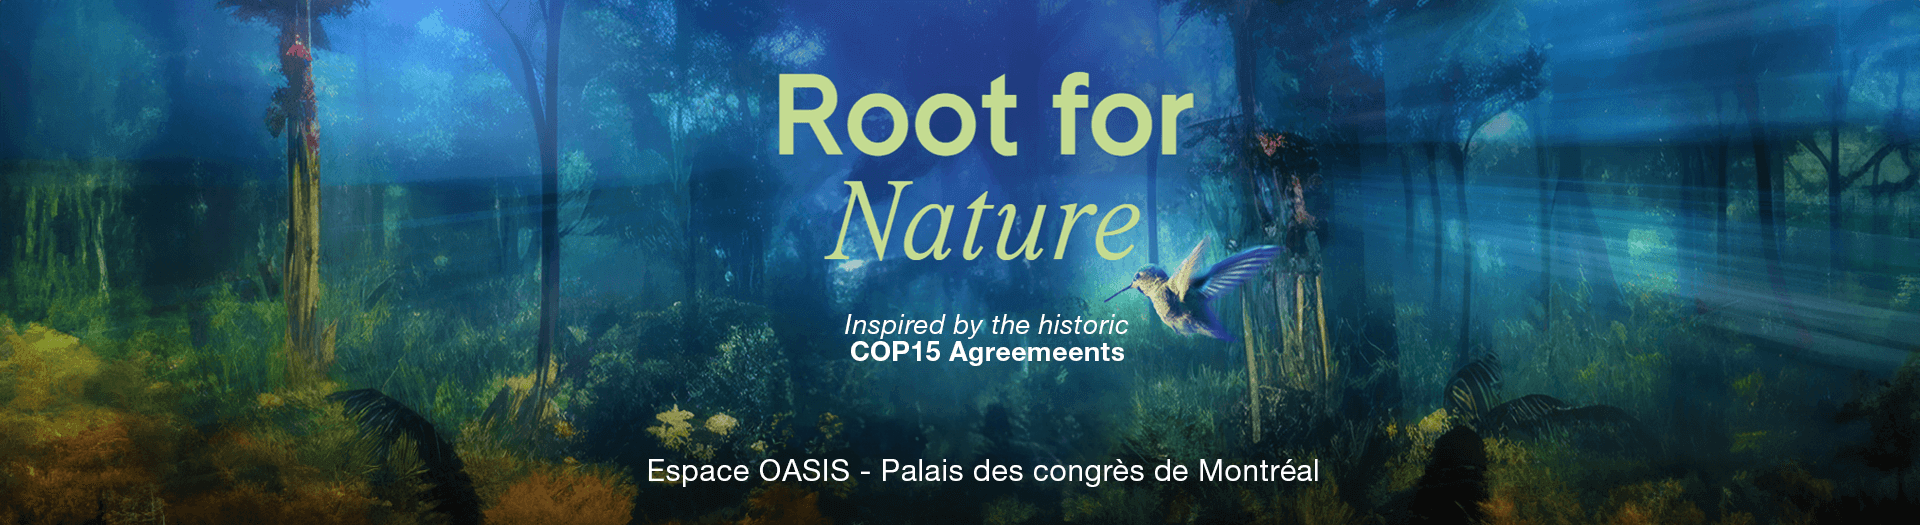 Root for Nature | Inspired by the historic COP15 Agreements